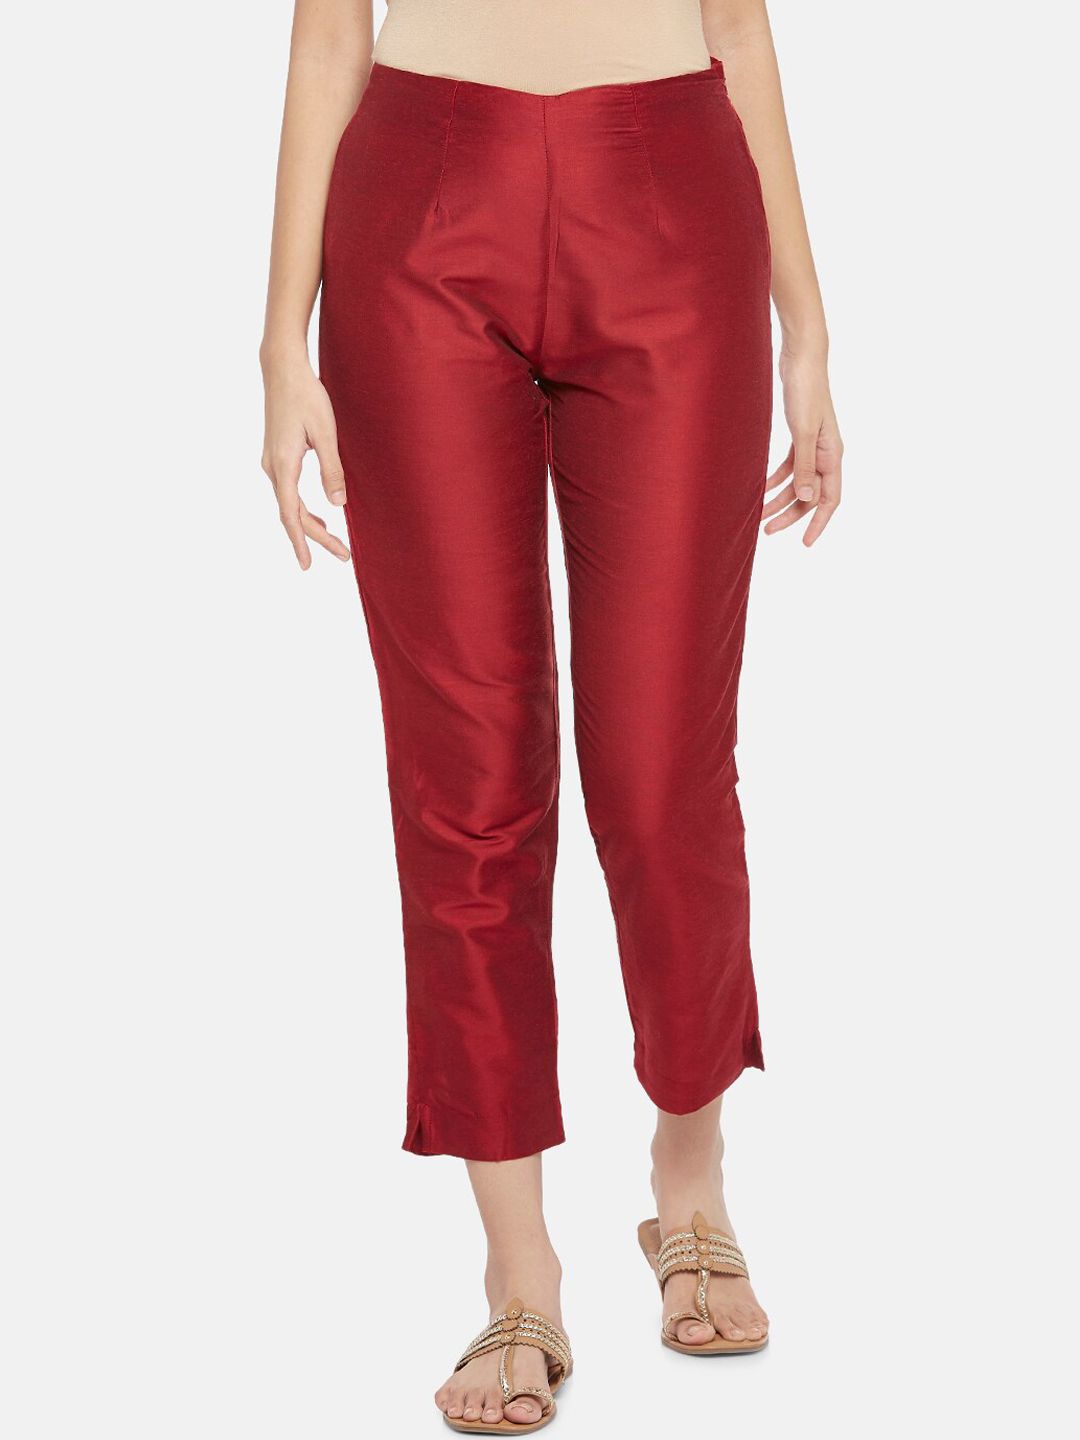 RANGMANCH BY PANTALOONS Women Red Peg Trousers Price in India